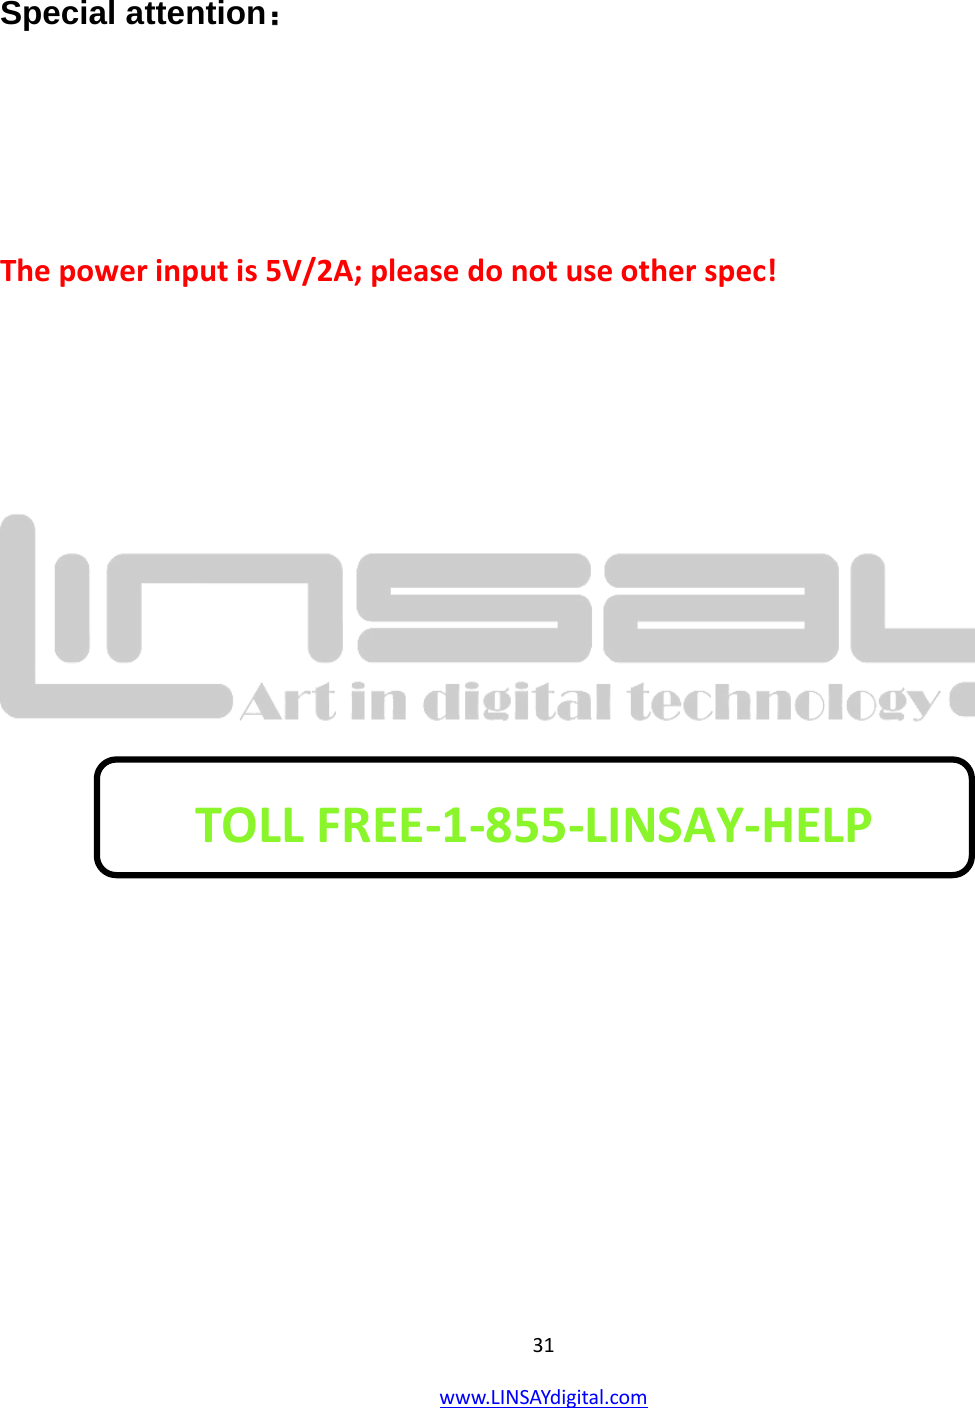  31 www.LINSAYdigital.com    Special attention：   The power input is 5V/2A; please do not use other spec!           TOLL FREE-1-855-LINSAY-HELP  